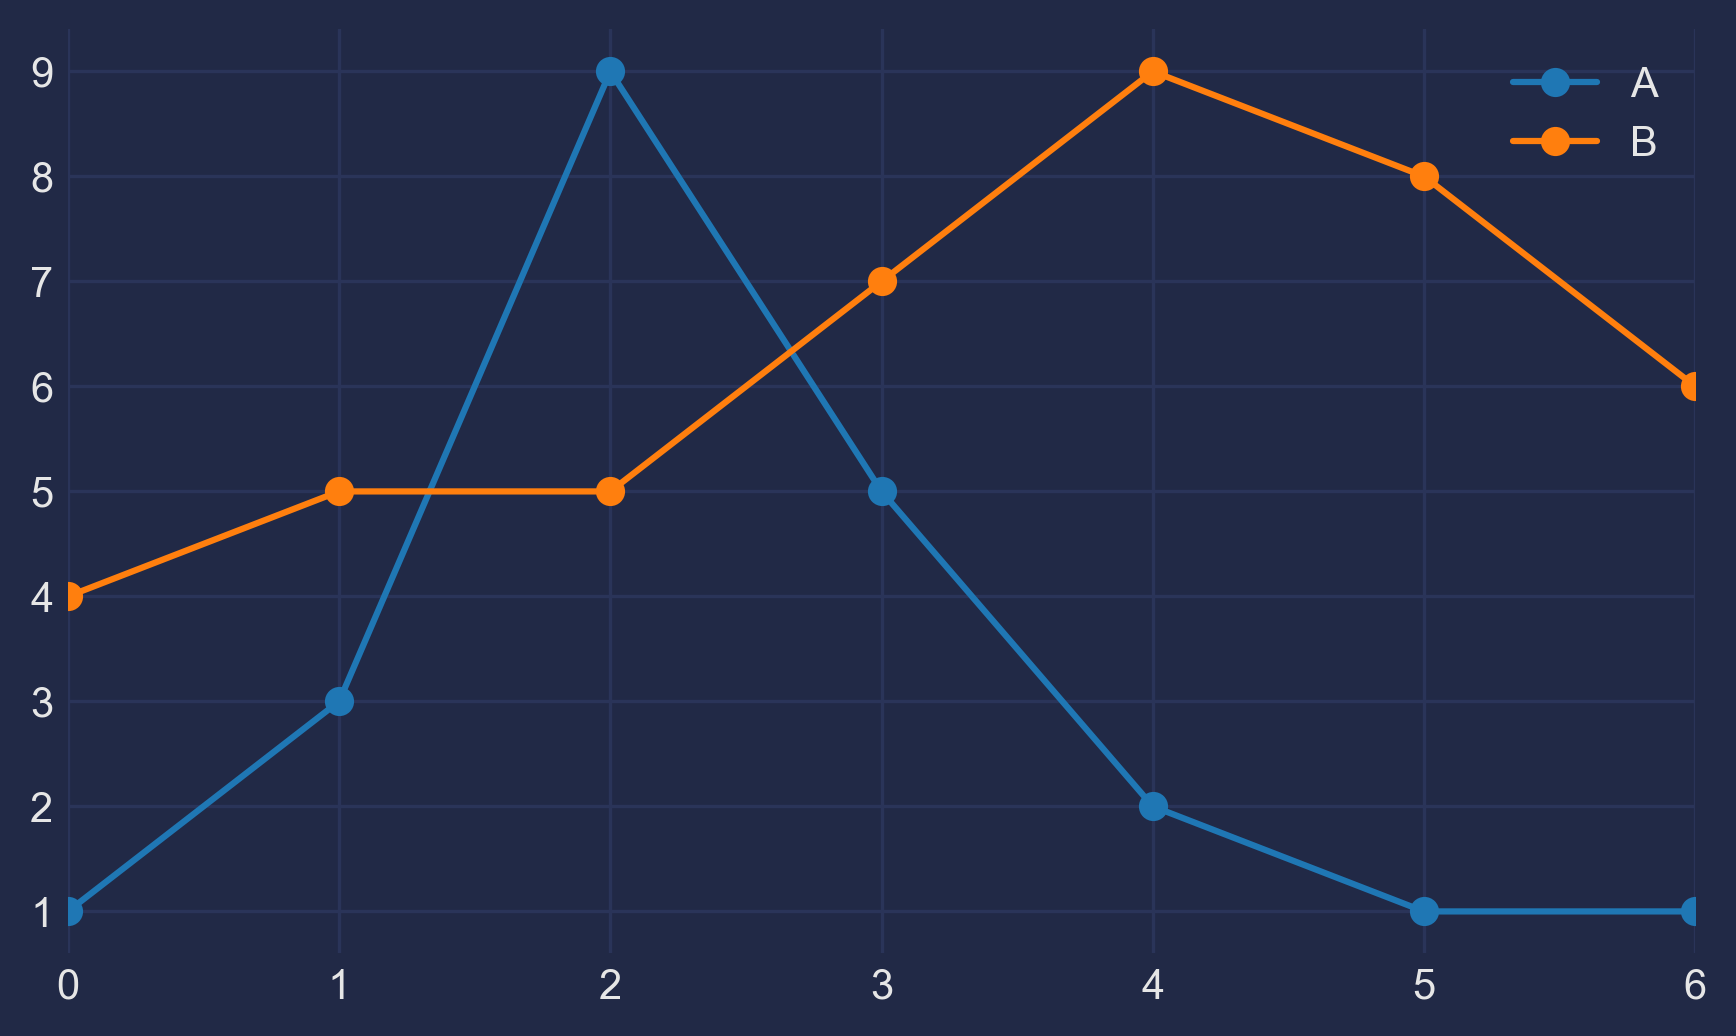 A simple chart with a dark background consisted of two lines: A is the blue line and B is the orange line.